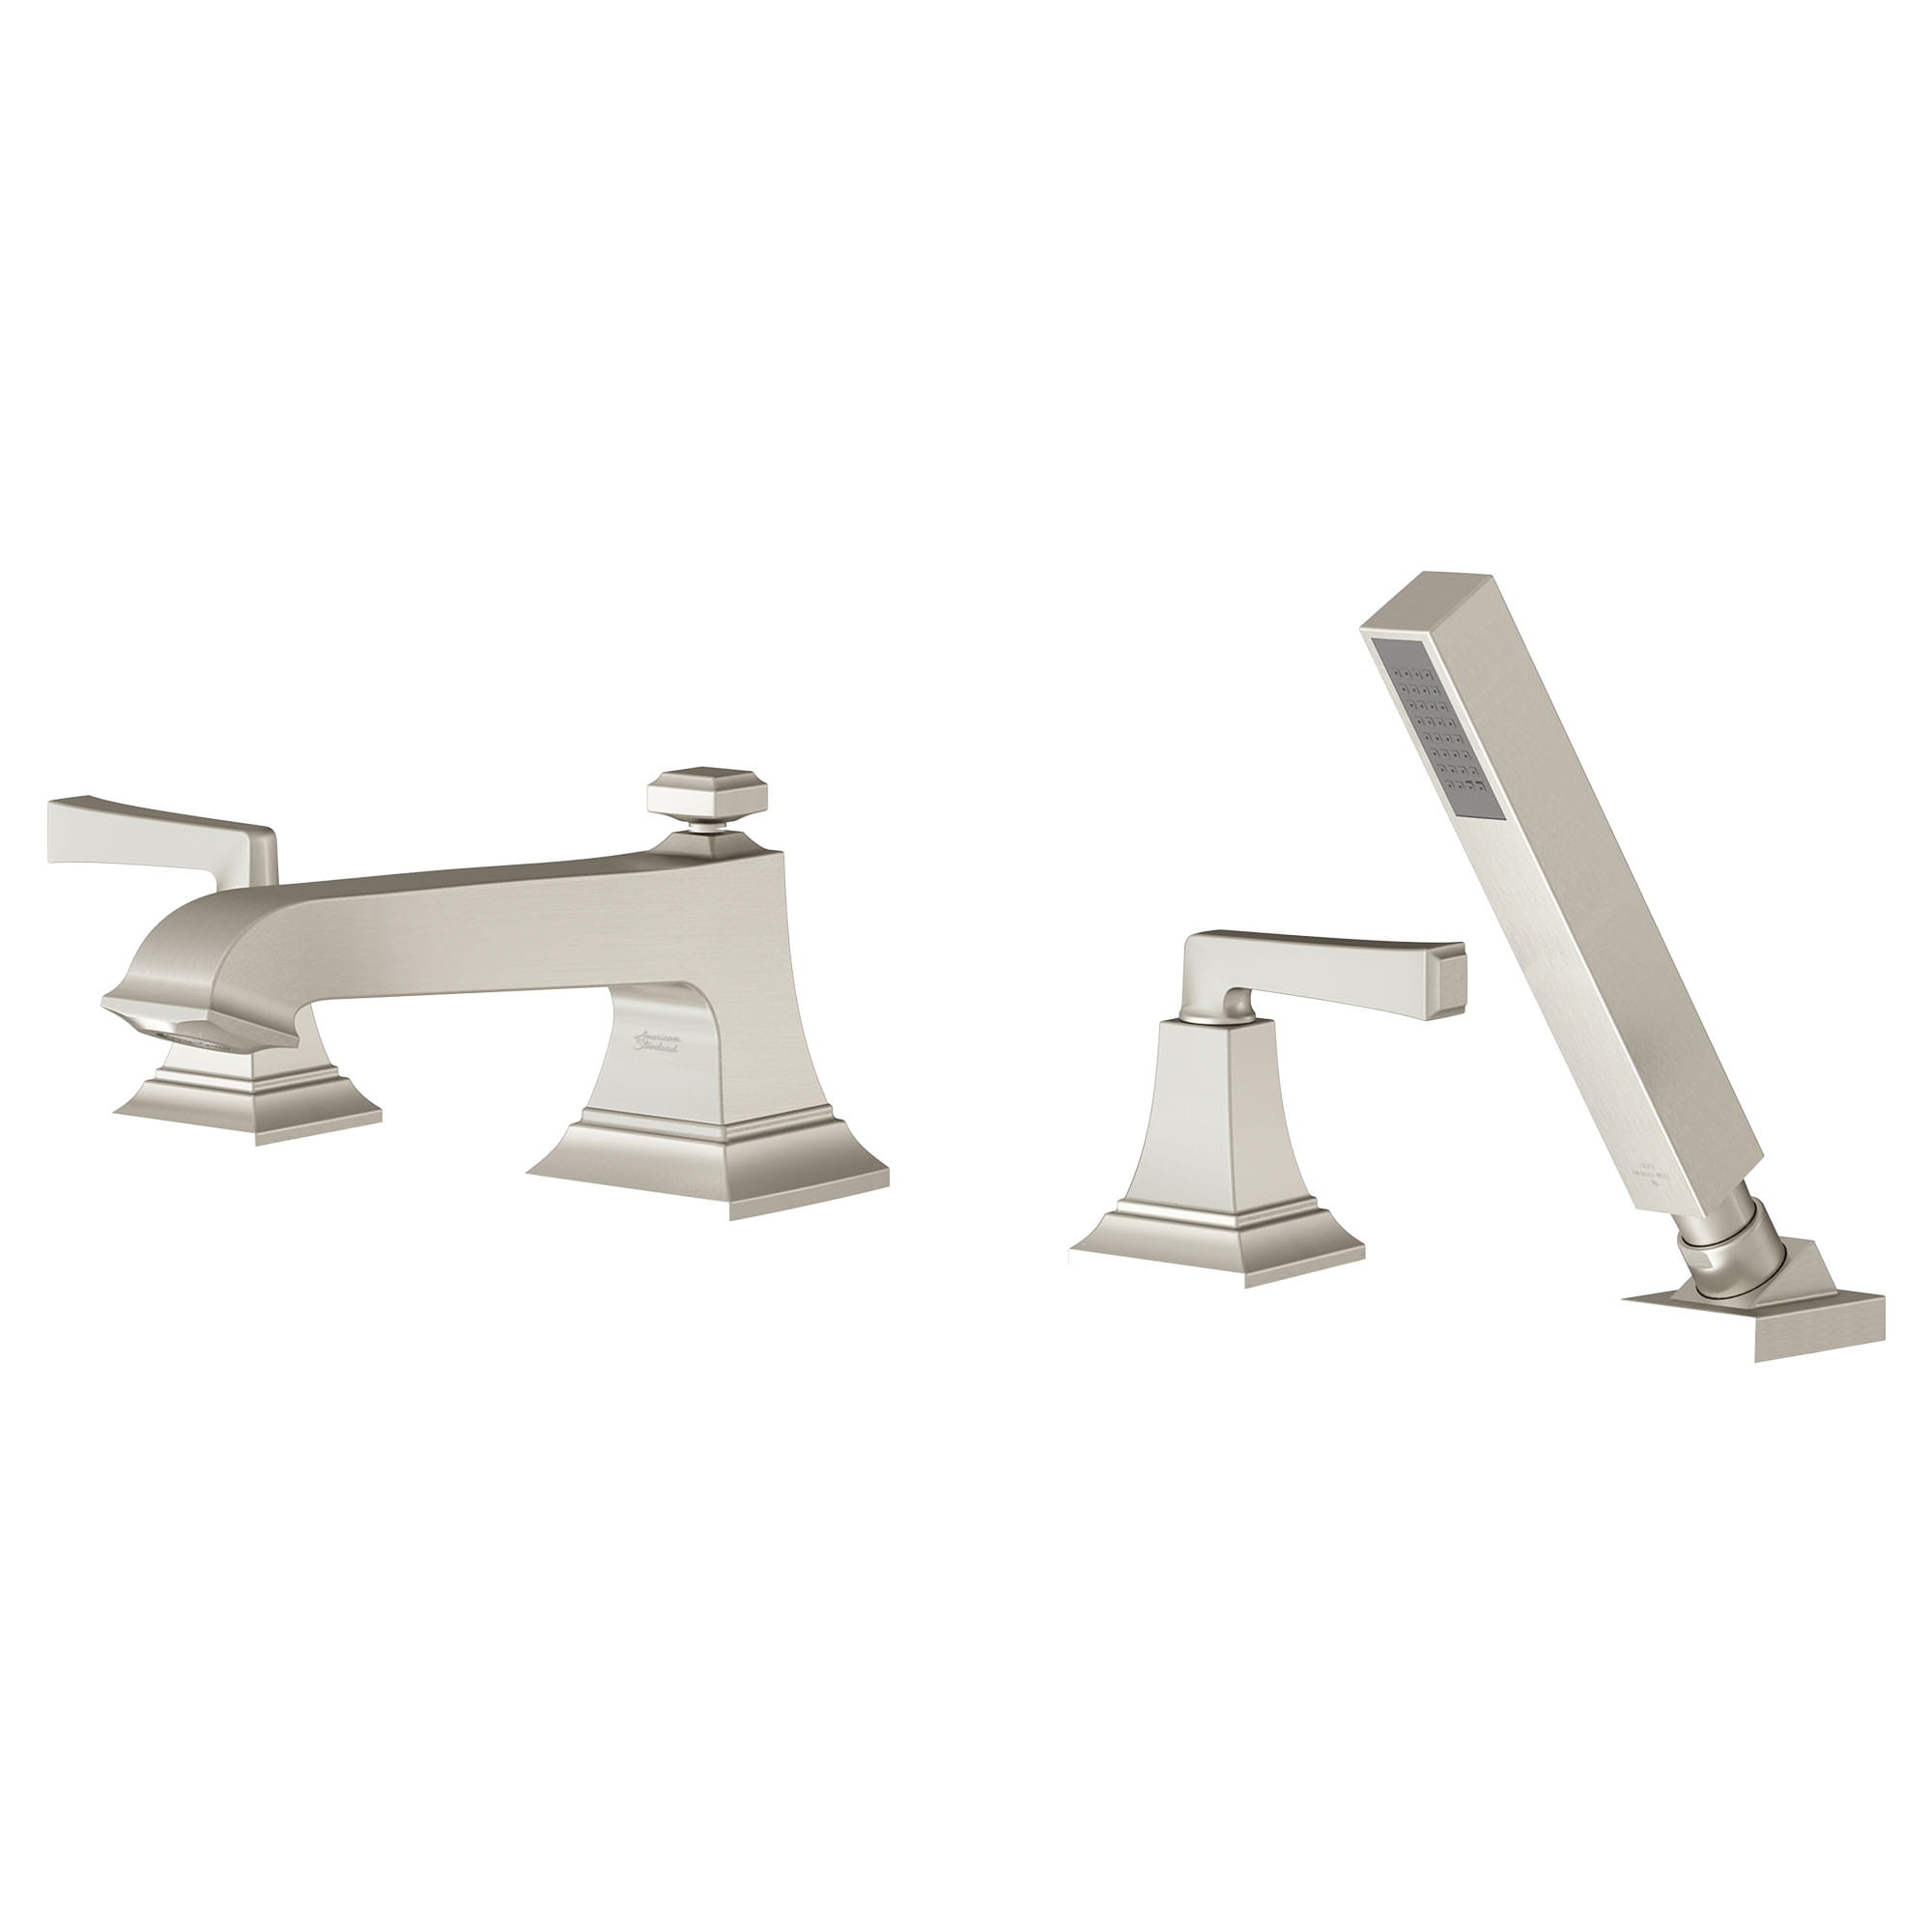 Town Square® S Bathub Faucet With Lever Handles and Personal Shower for Flash® Rough-in Valve